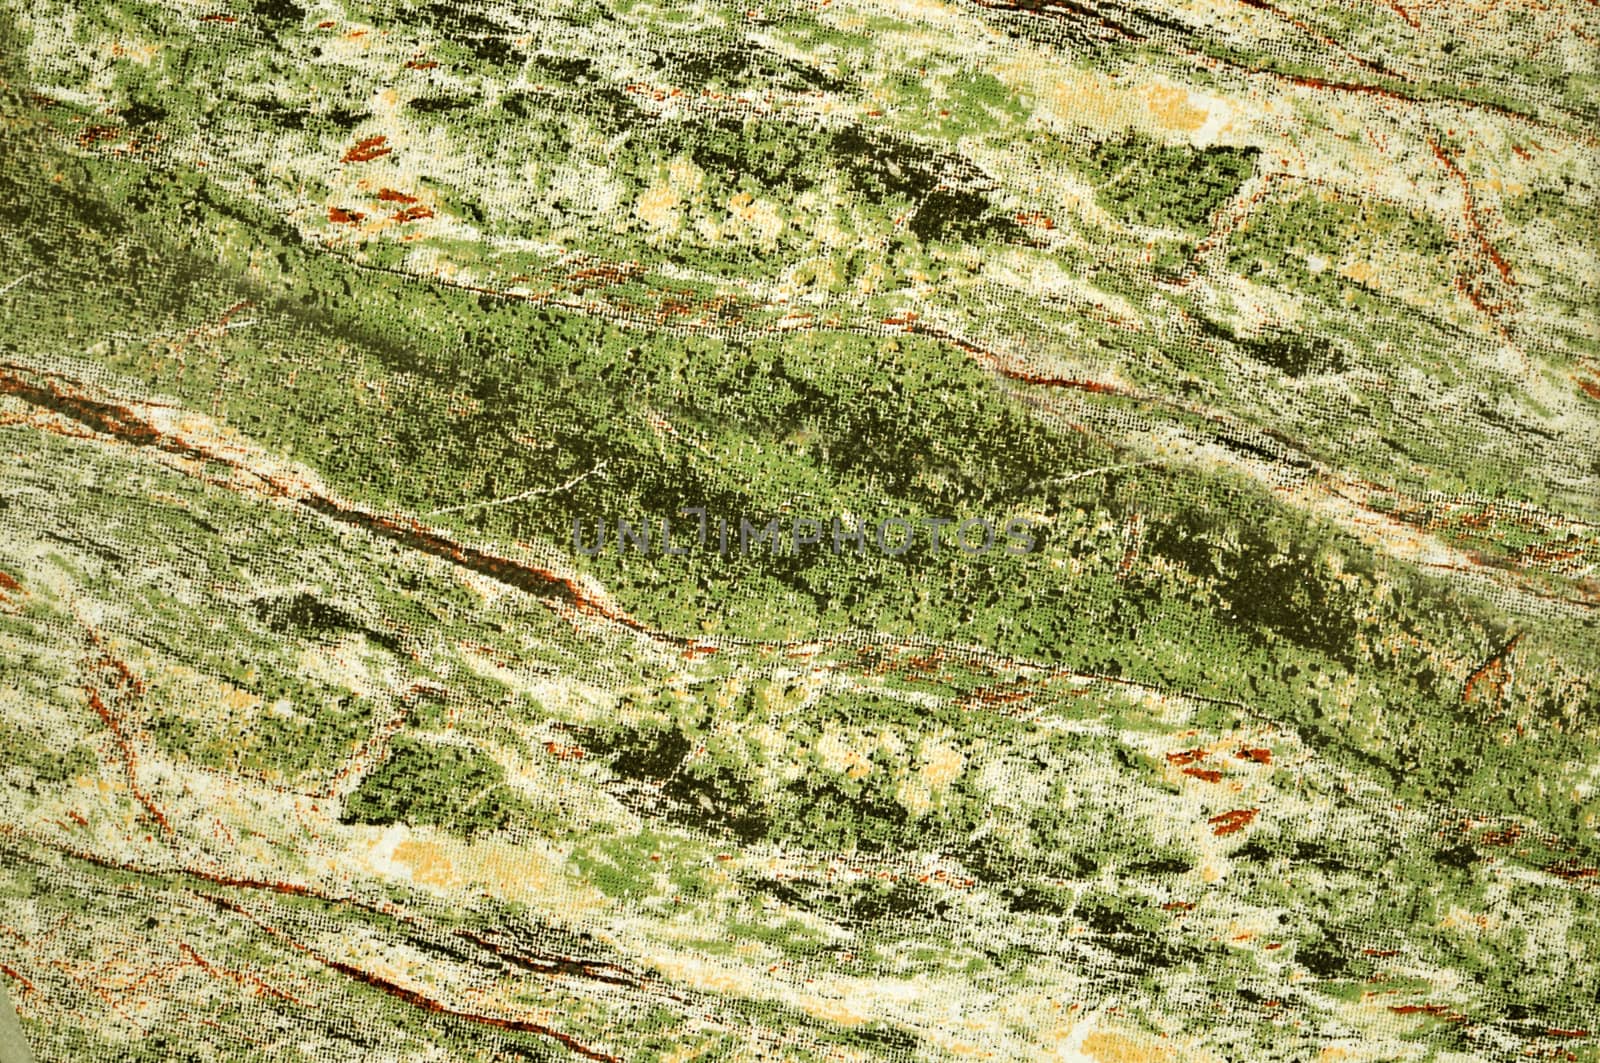 Green marble texture (high resolution core tissue)